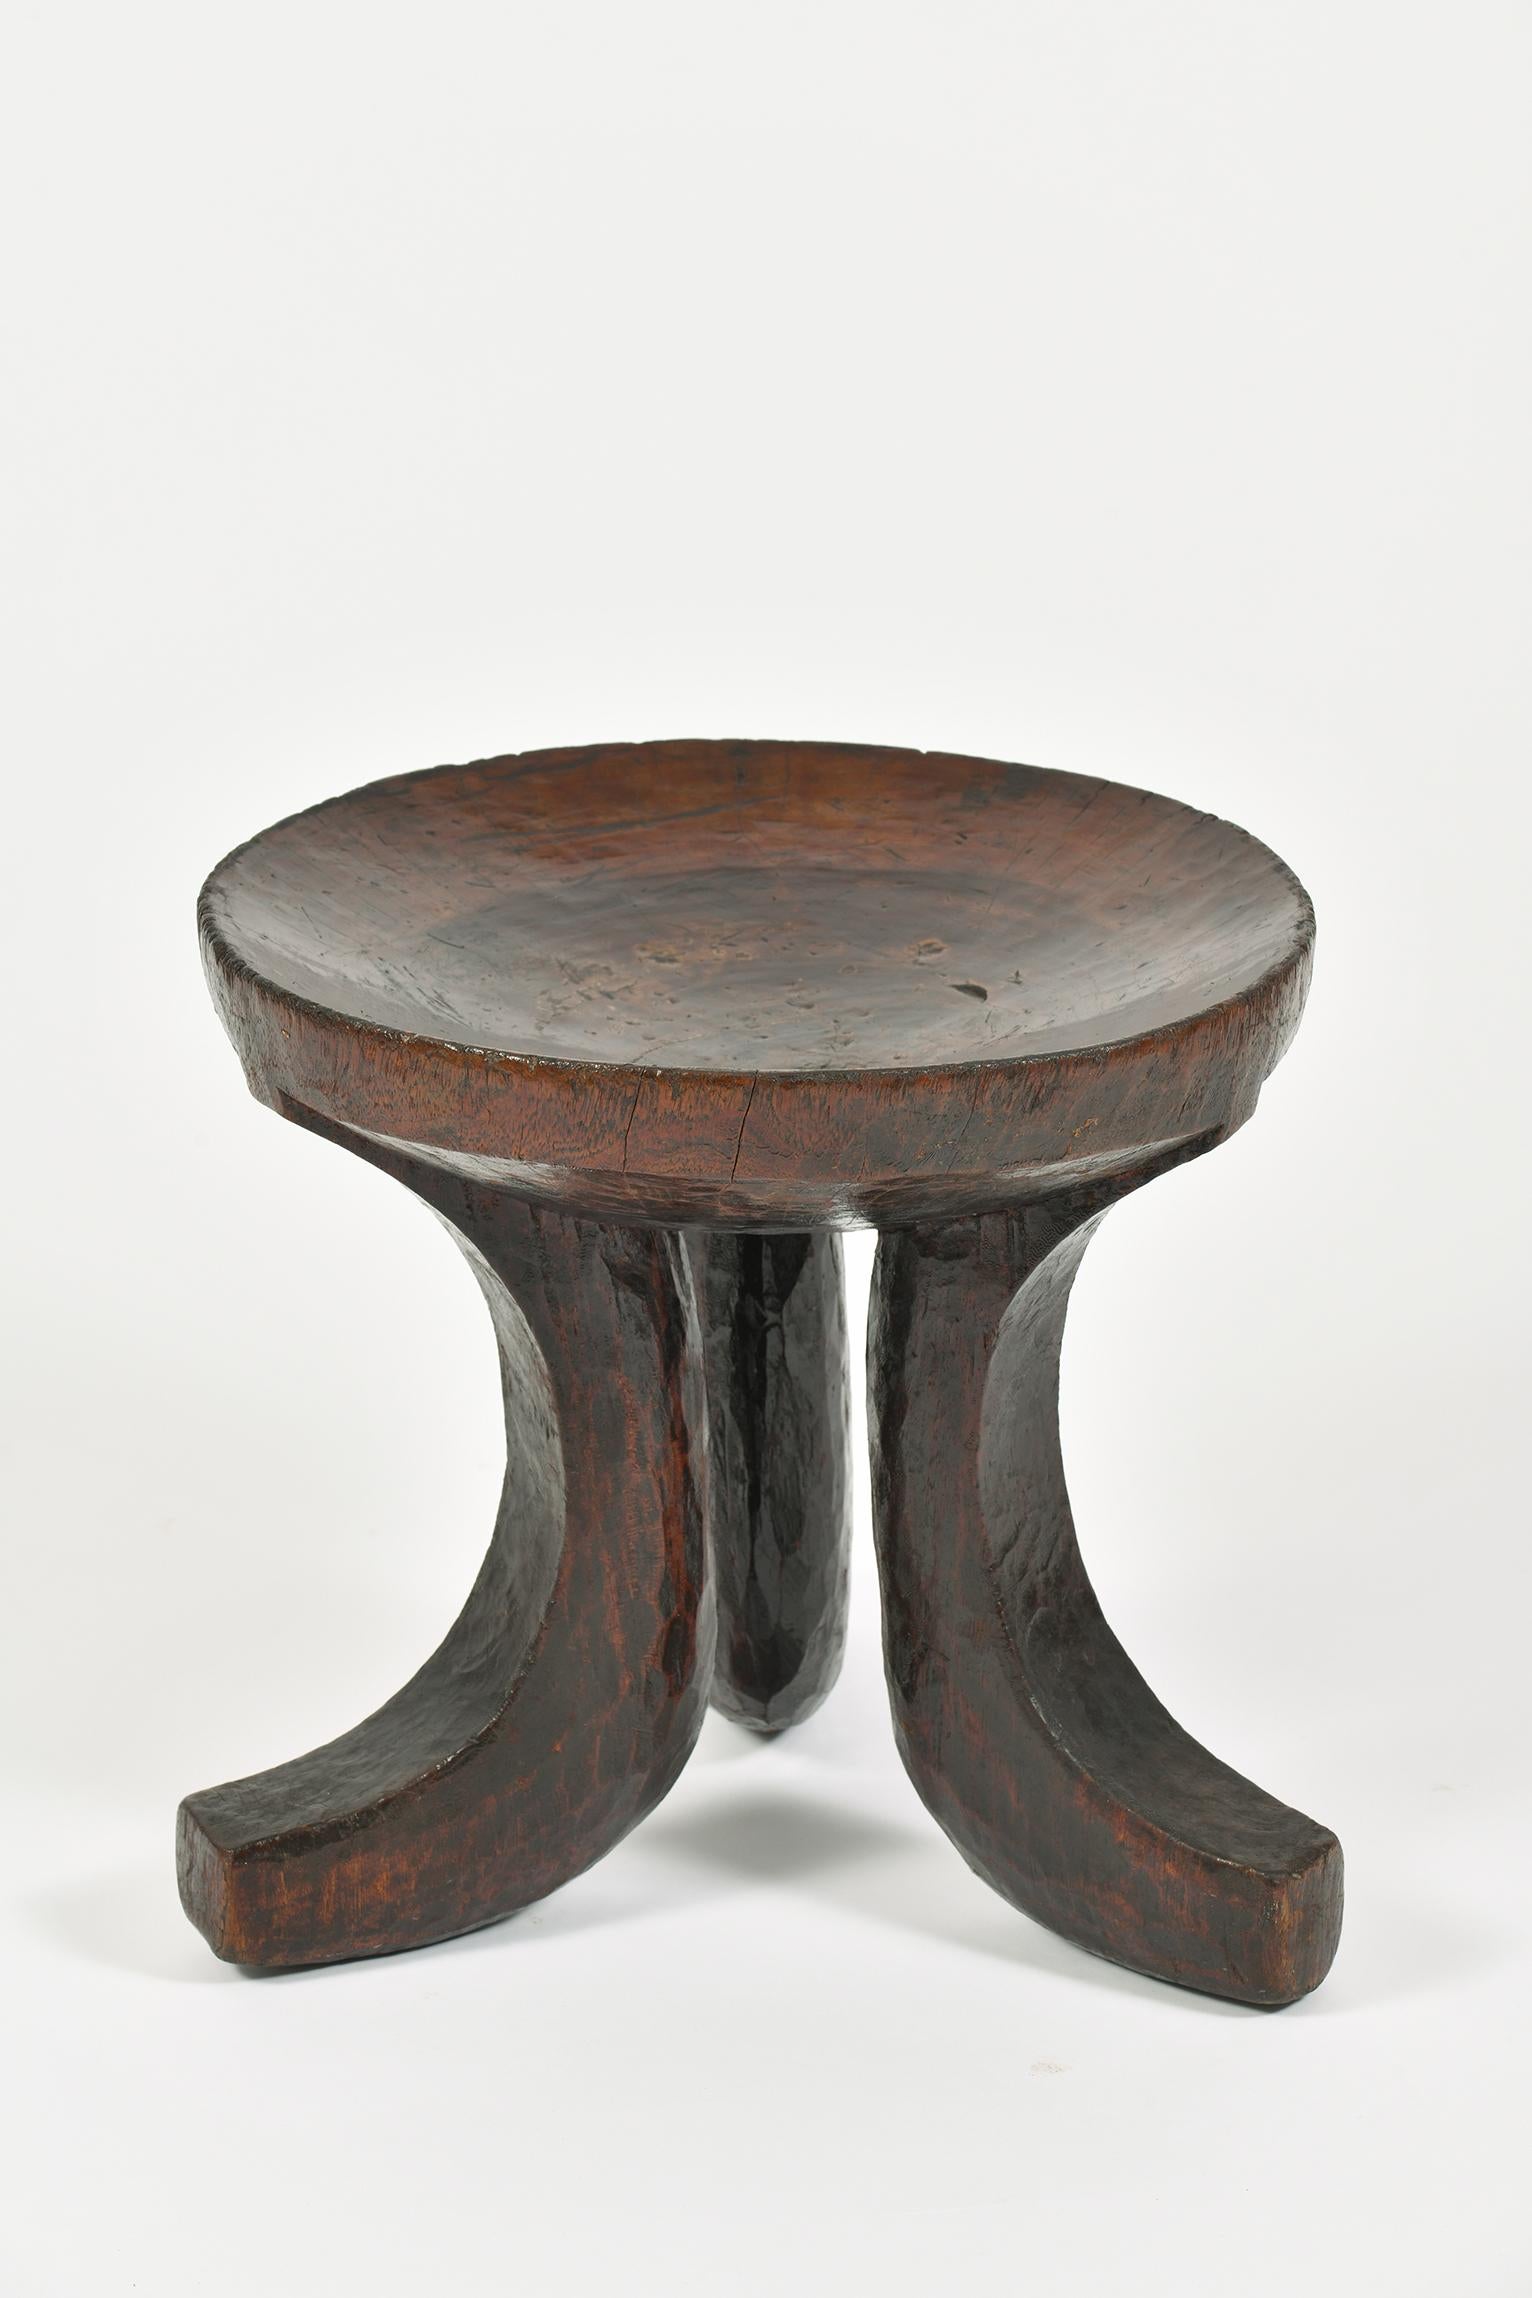 Ethiopian African Carved Wood Tripod Stool